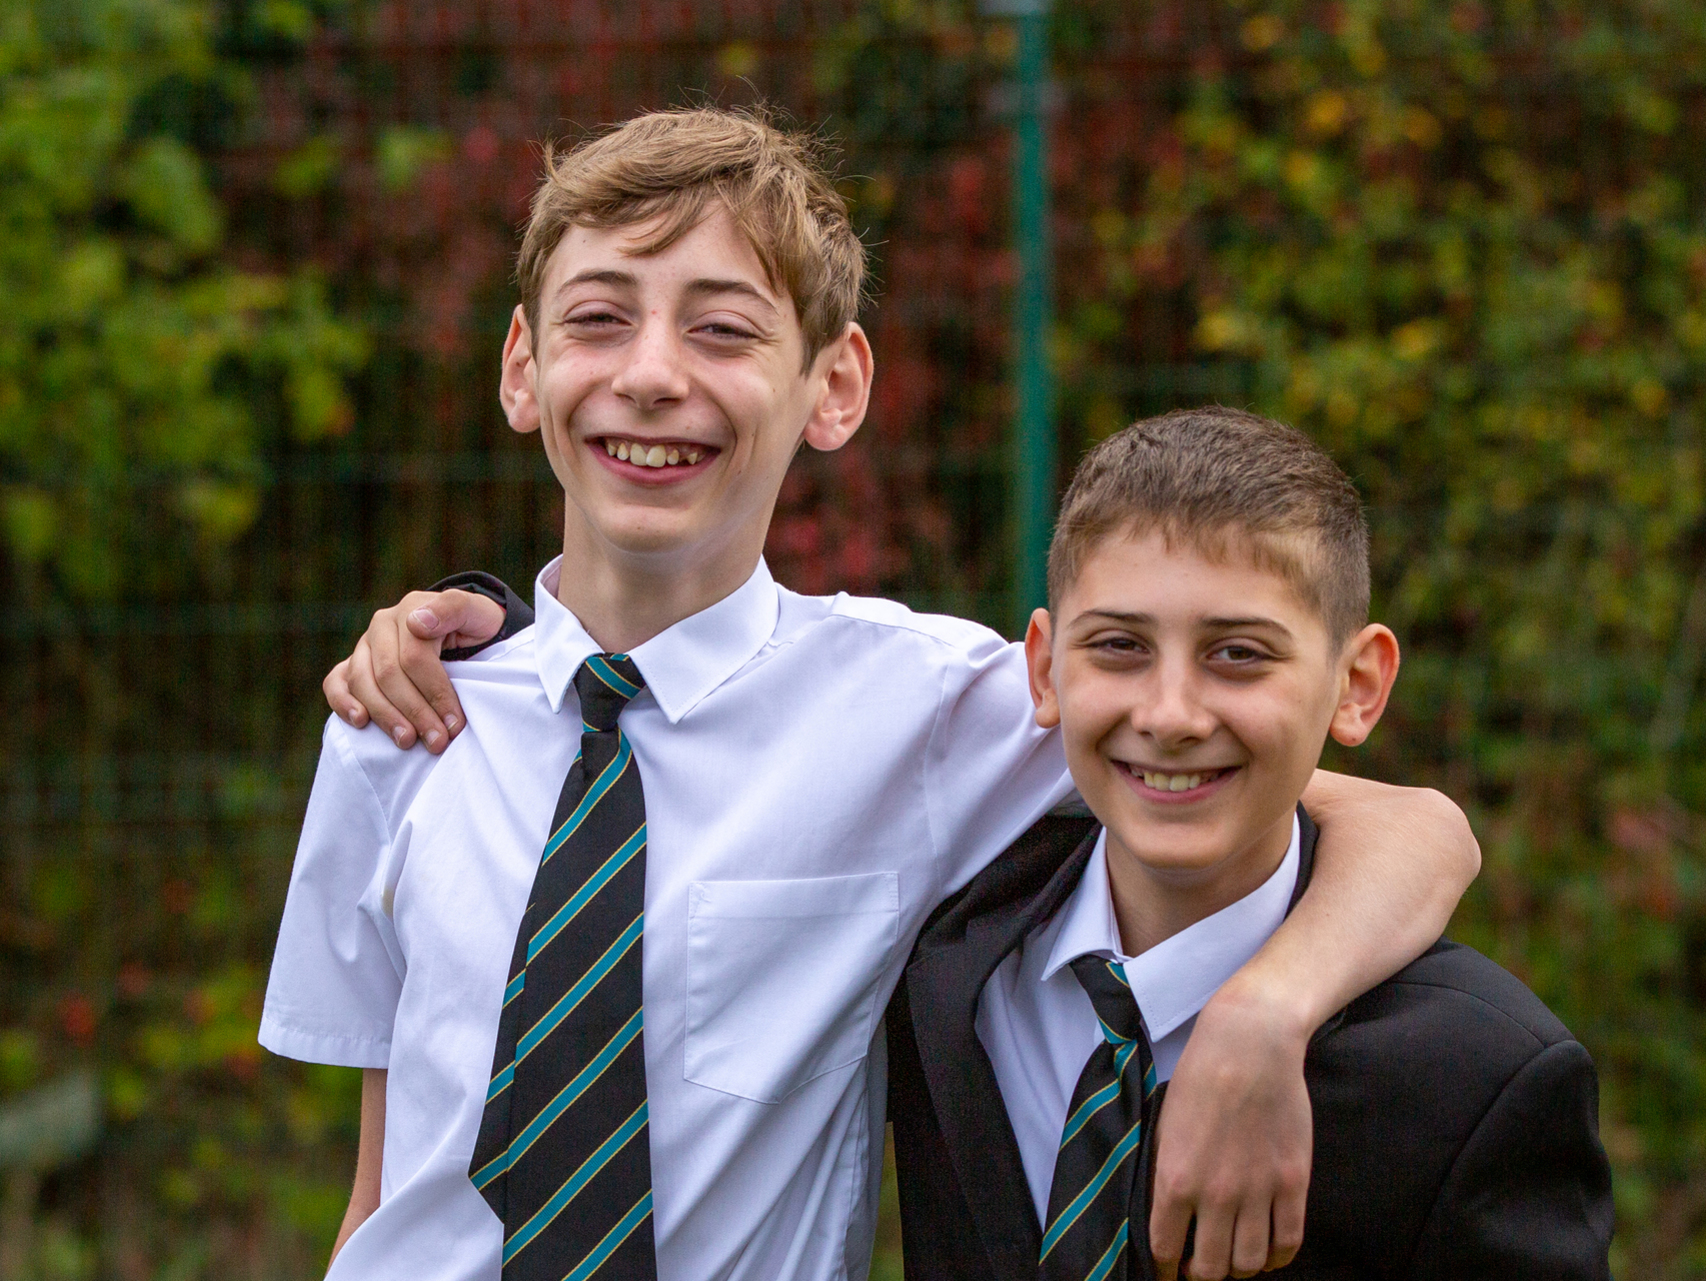 Brotherly love. Sibling photographs available in our special needs school sessions.